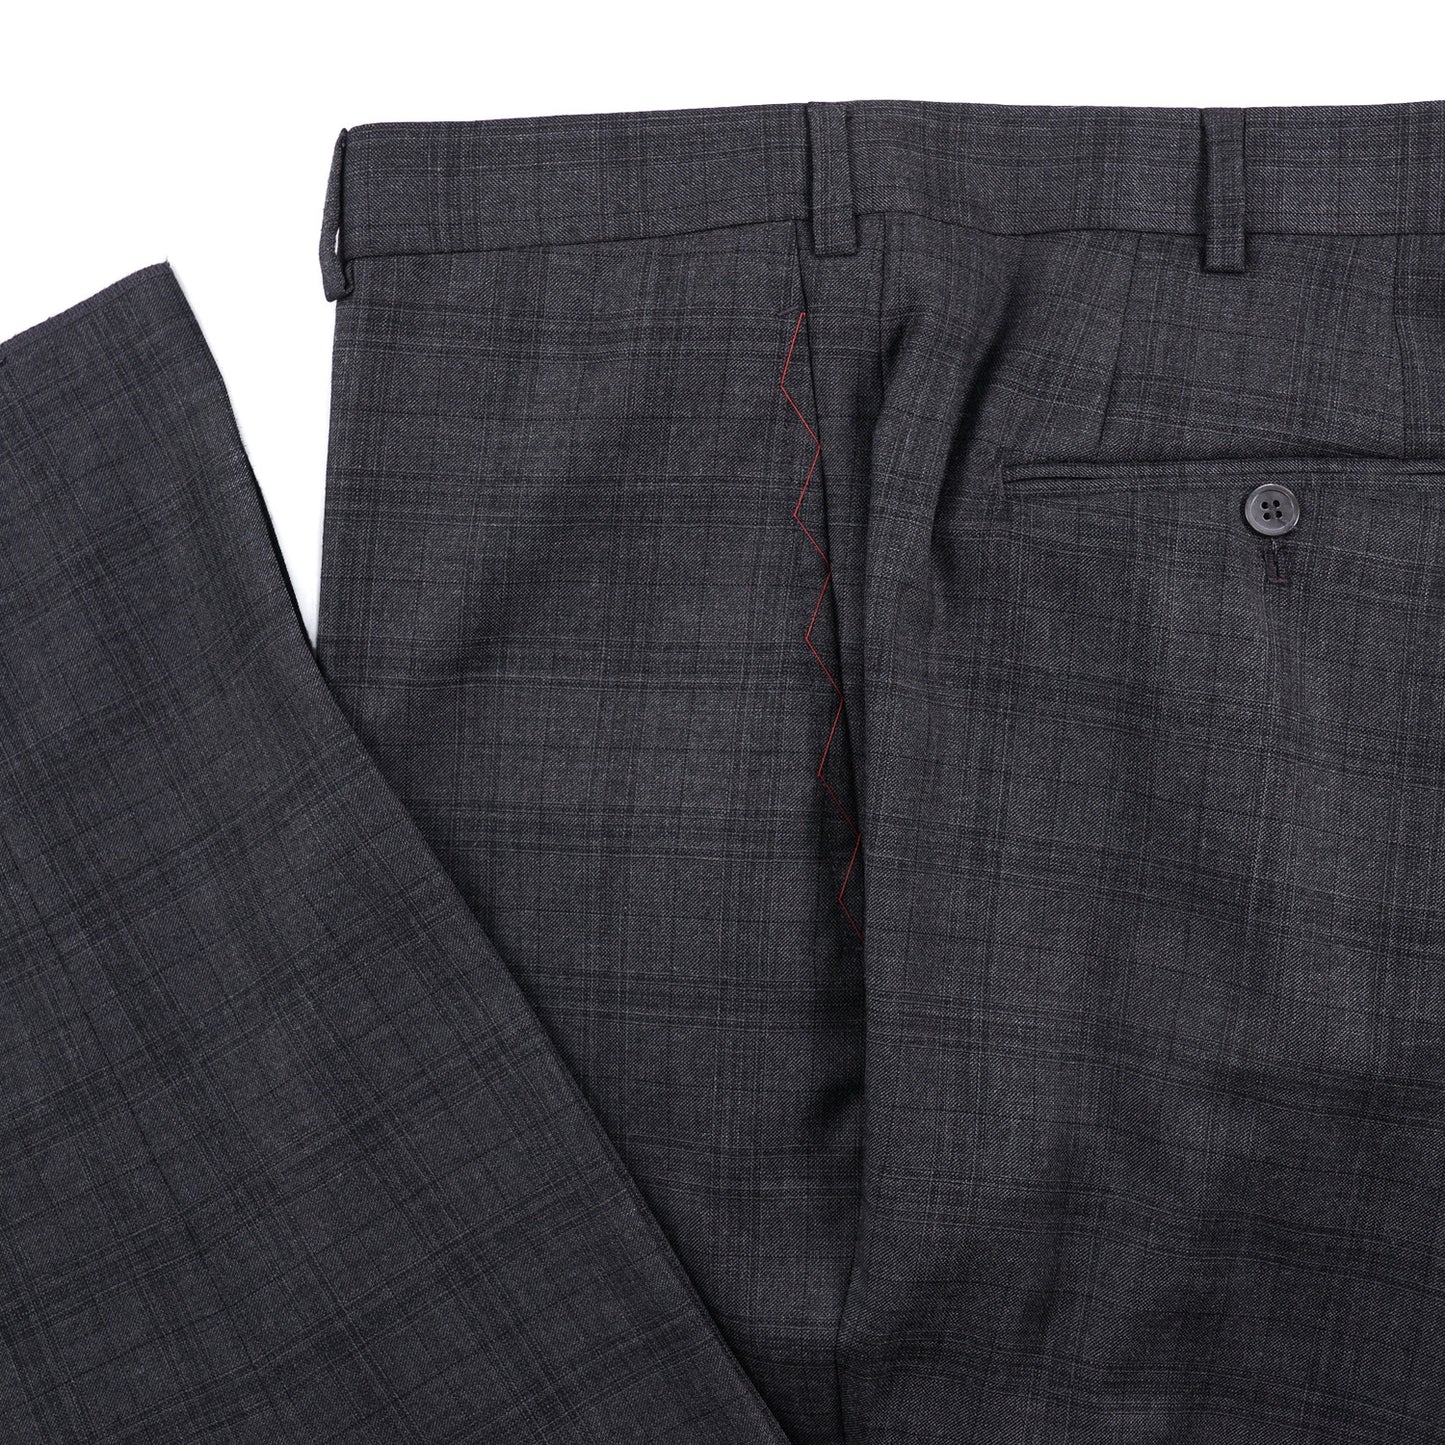 Isaia Extra-Slim Layered Check Wool Suit - Top Shelf Apparel